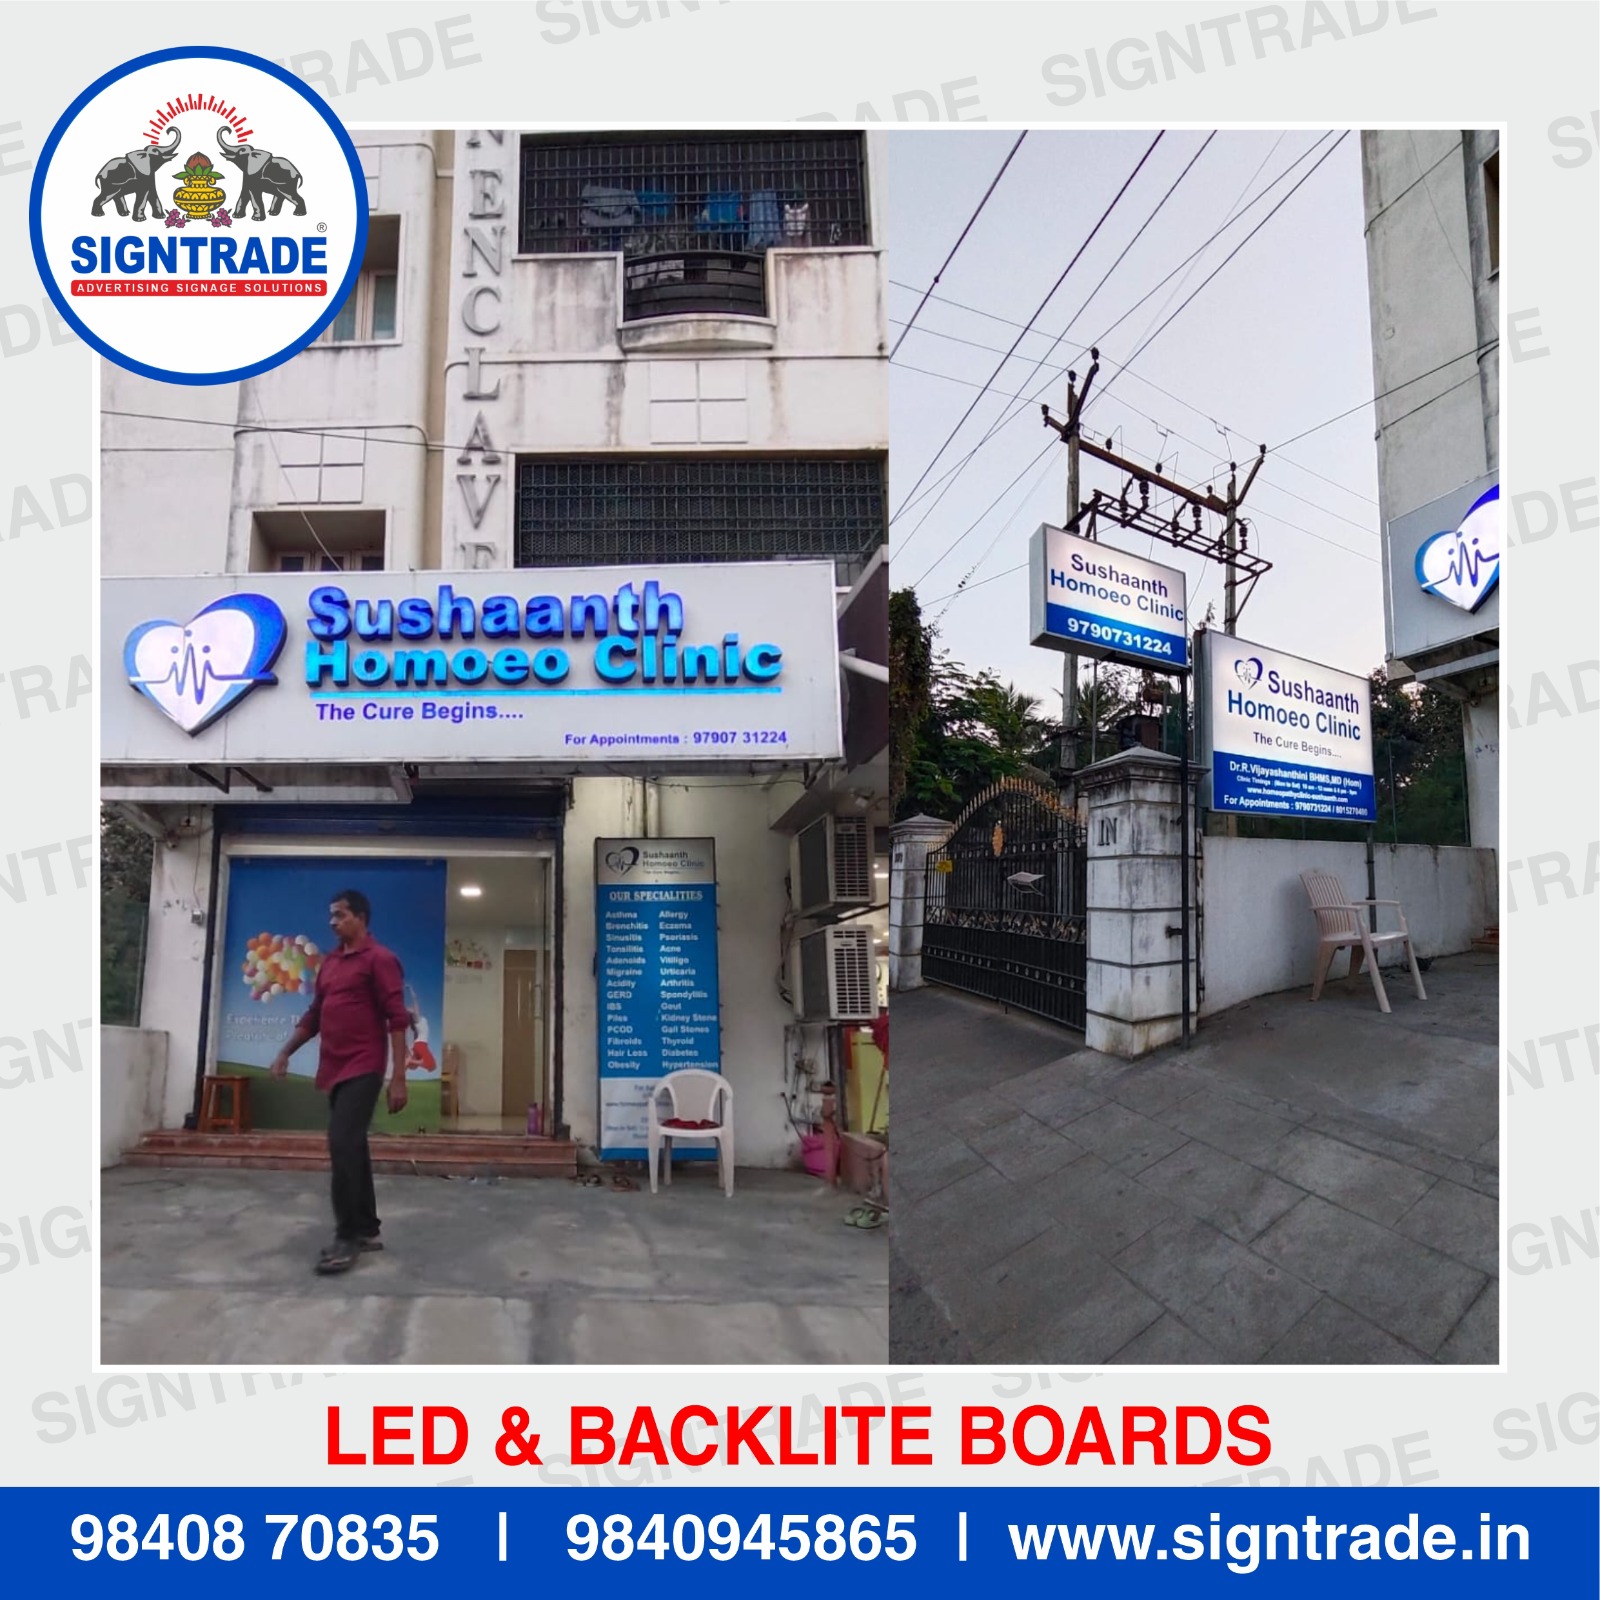 LED with Backlite Boards in Chennai